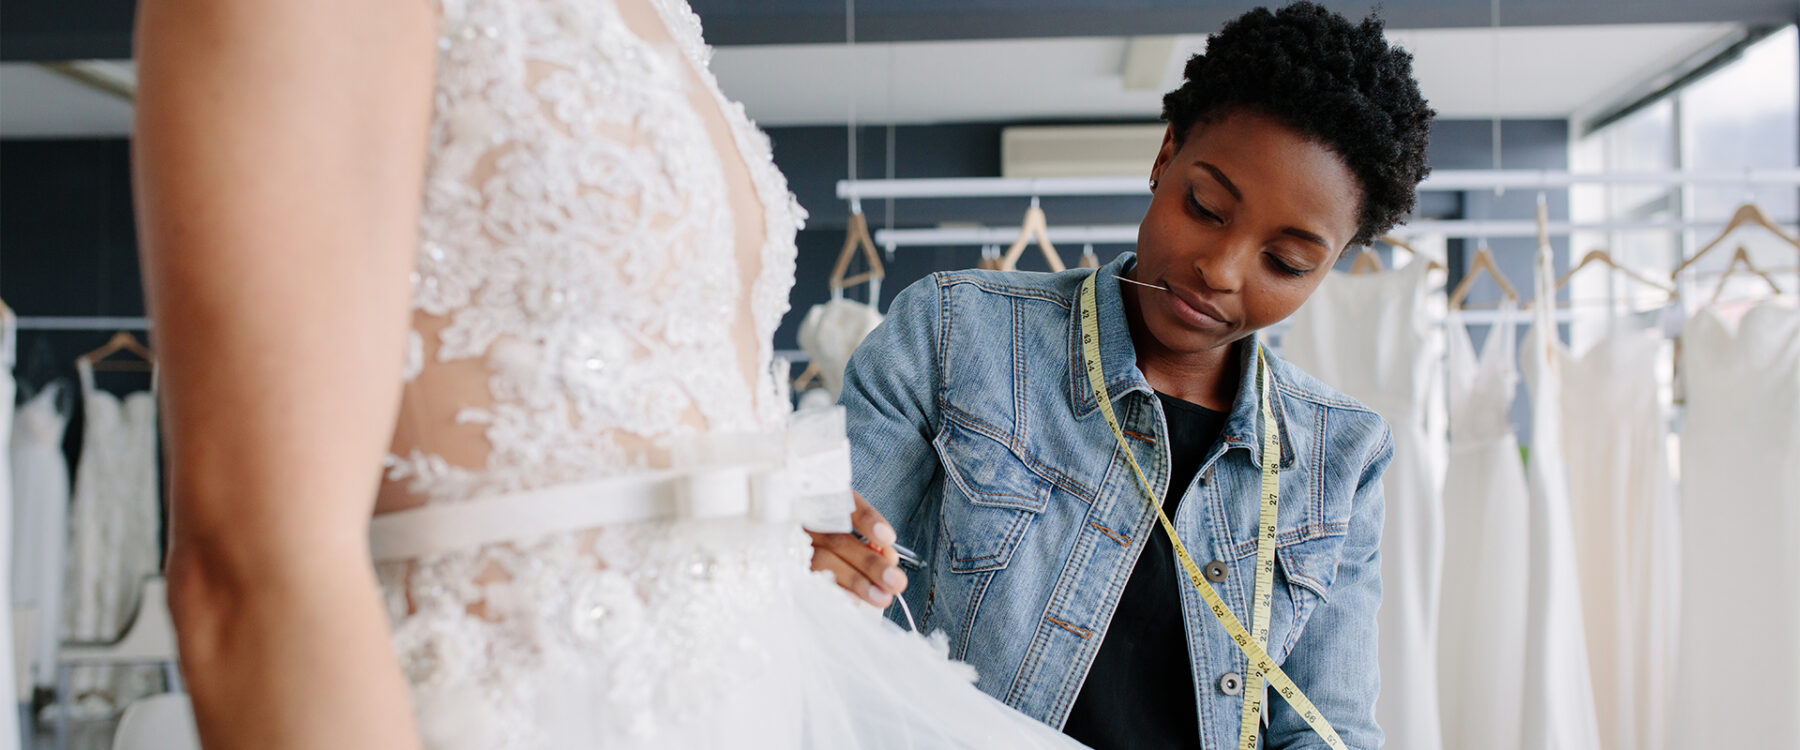 Guide: Wedding Dress Alterations (What to Do & When)